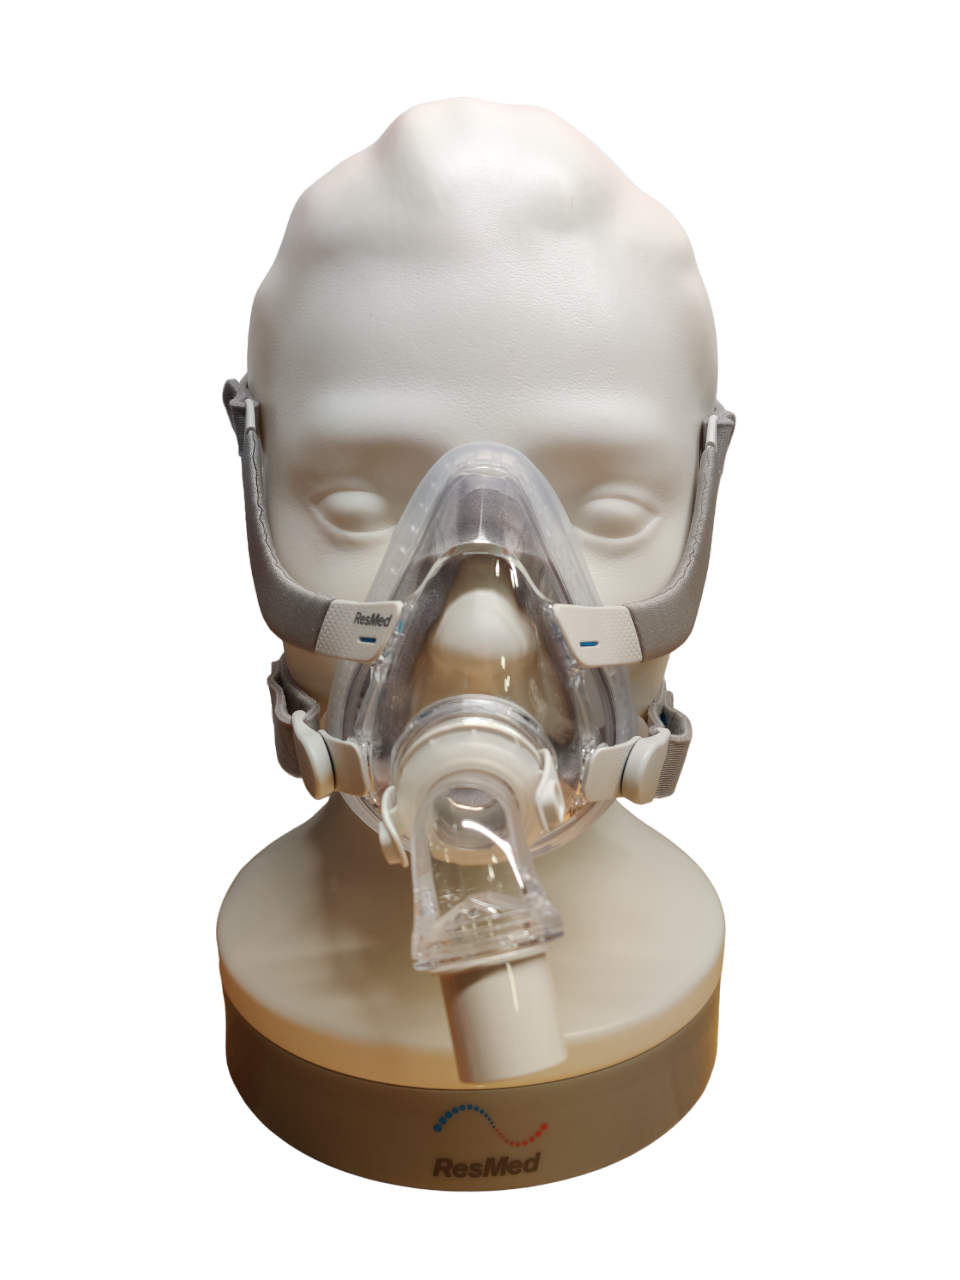 ResMed AirTouch F20 Full Face CPAP Mask without Headgear, Large